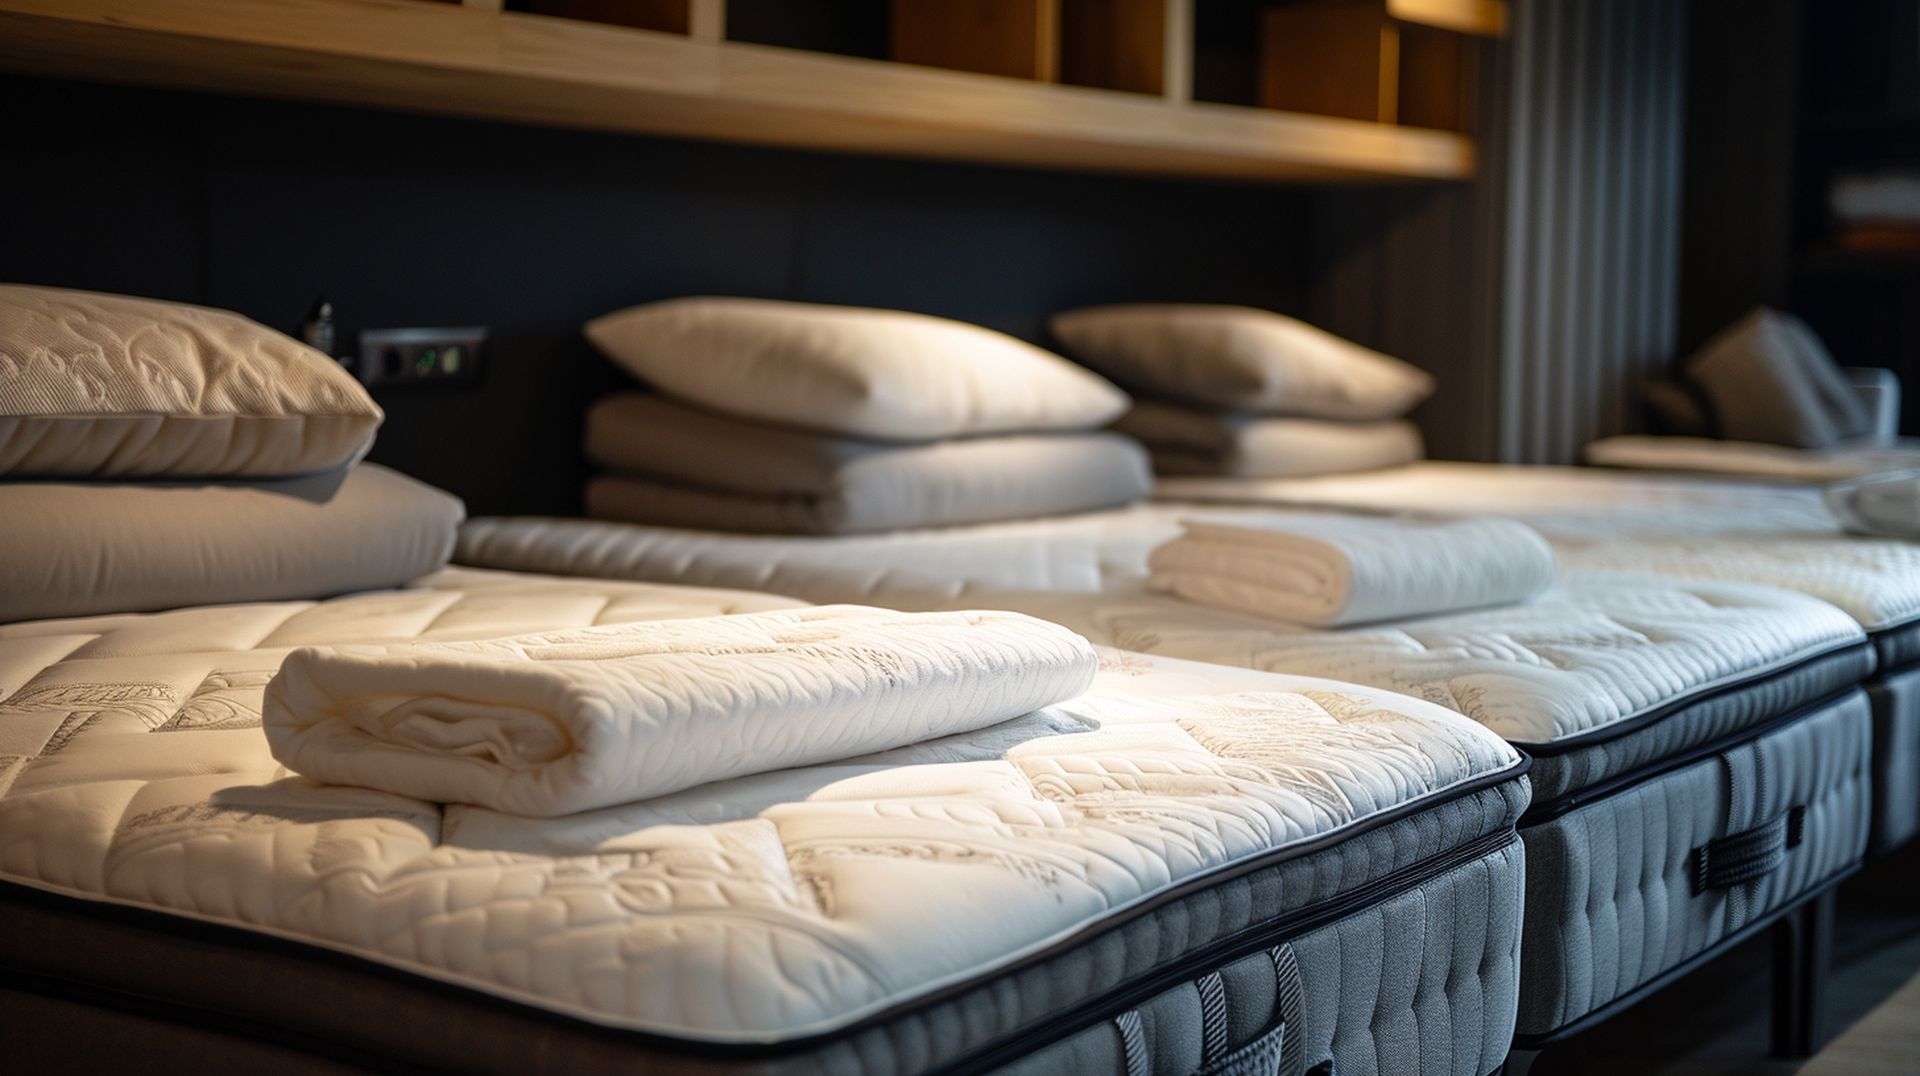 Types of mattresses at mattress dealers in Bloomington, IN